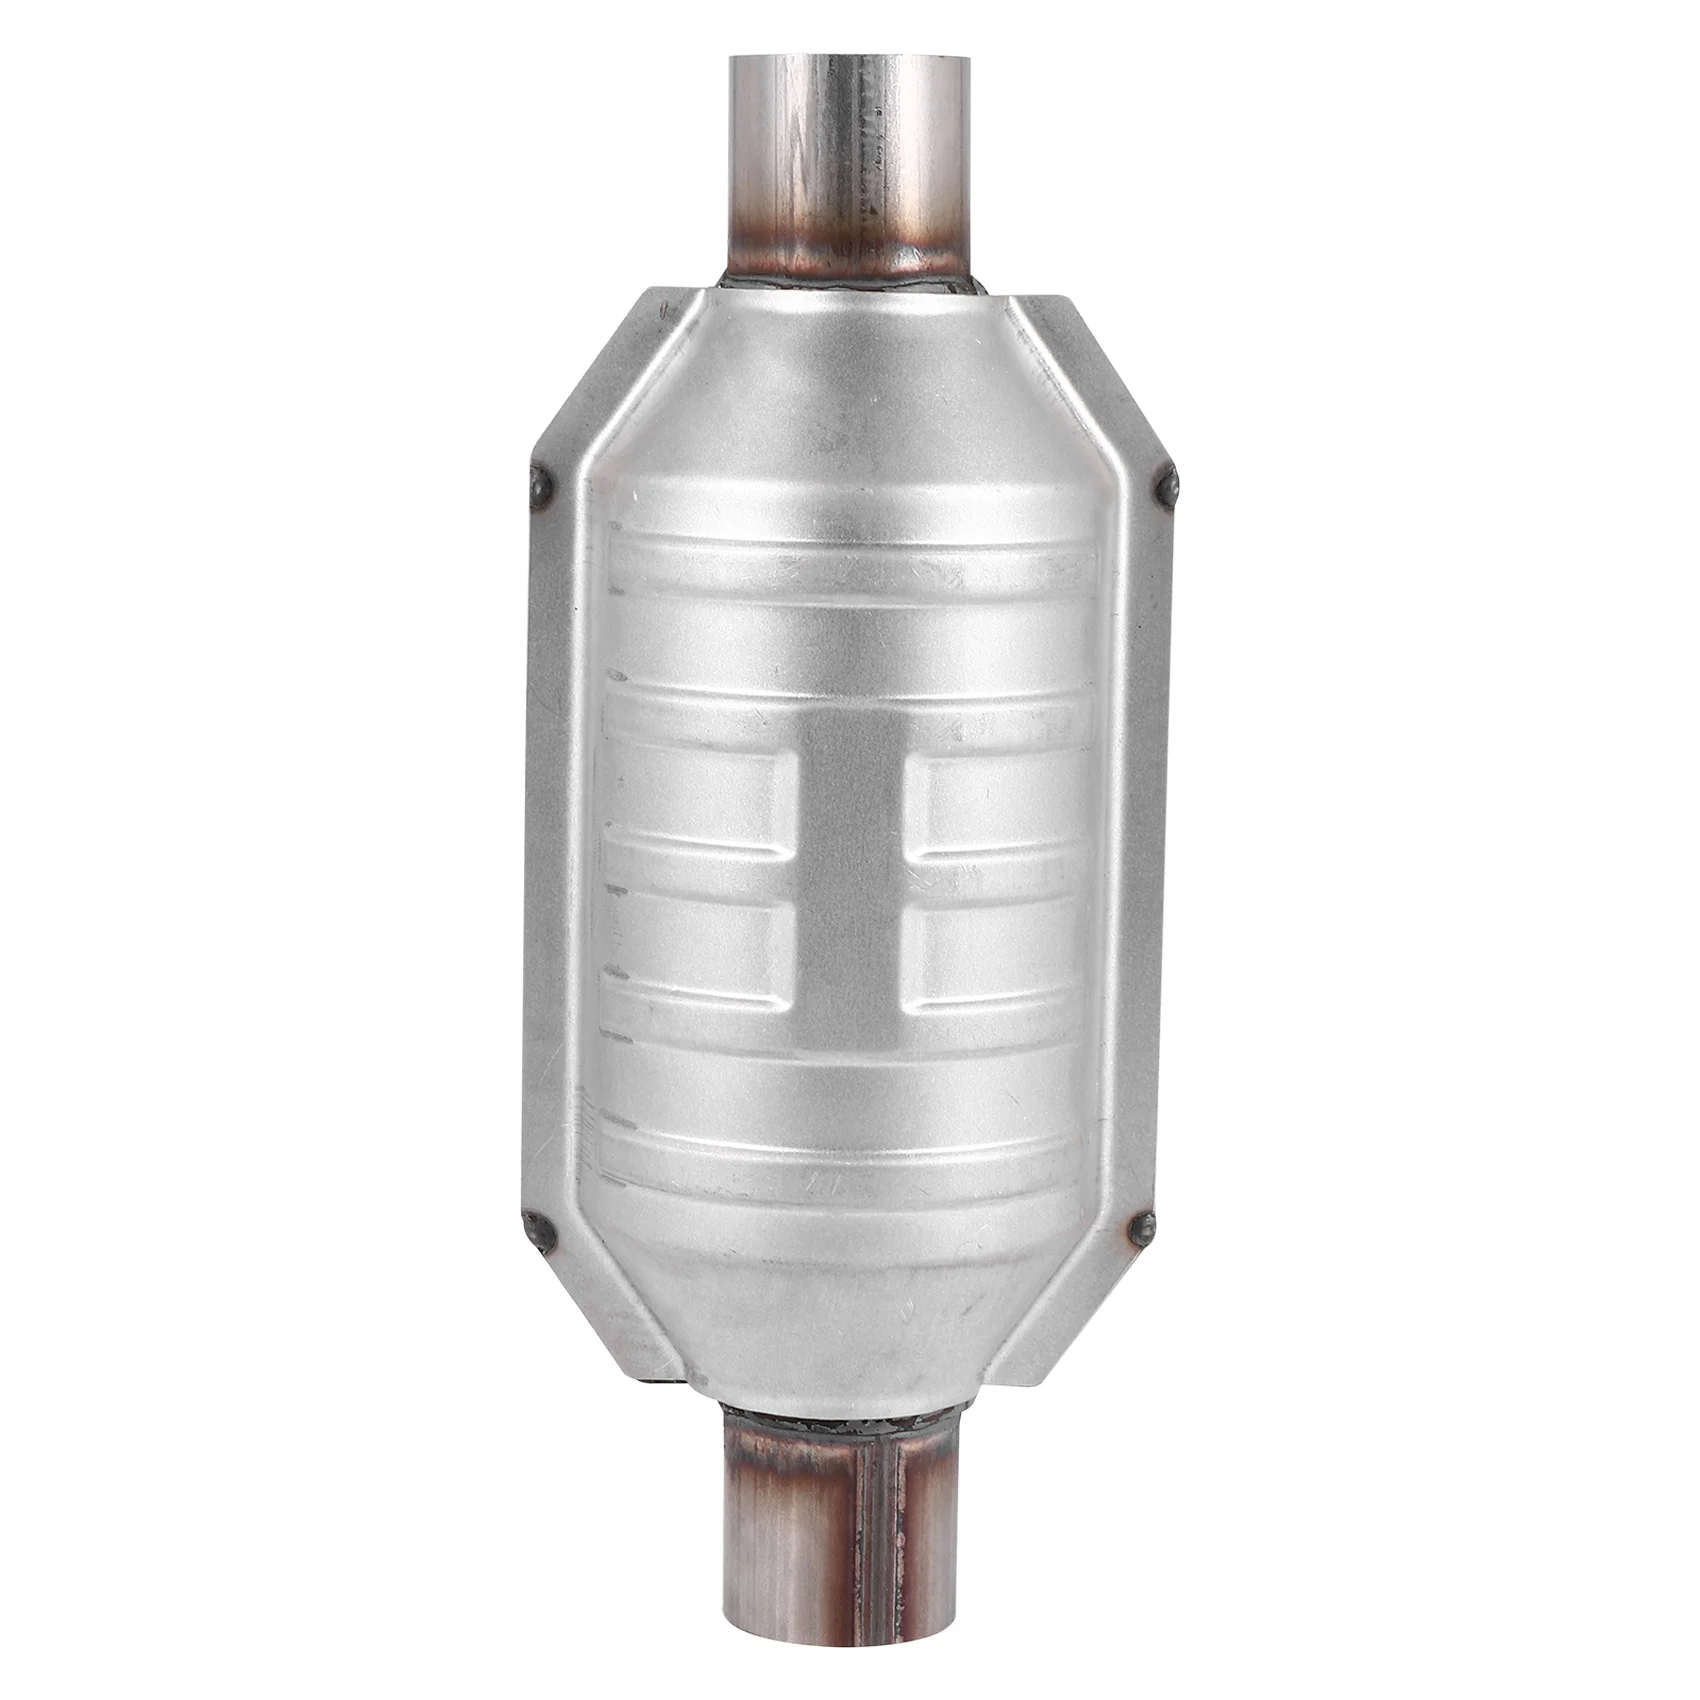 

Inlet/Outlet Universal Catalytic Converter, with O2 Port & Heat Shield 53004 Car Stainless Steel Catalytic Converter